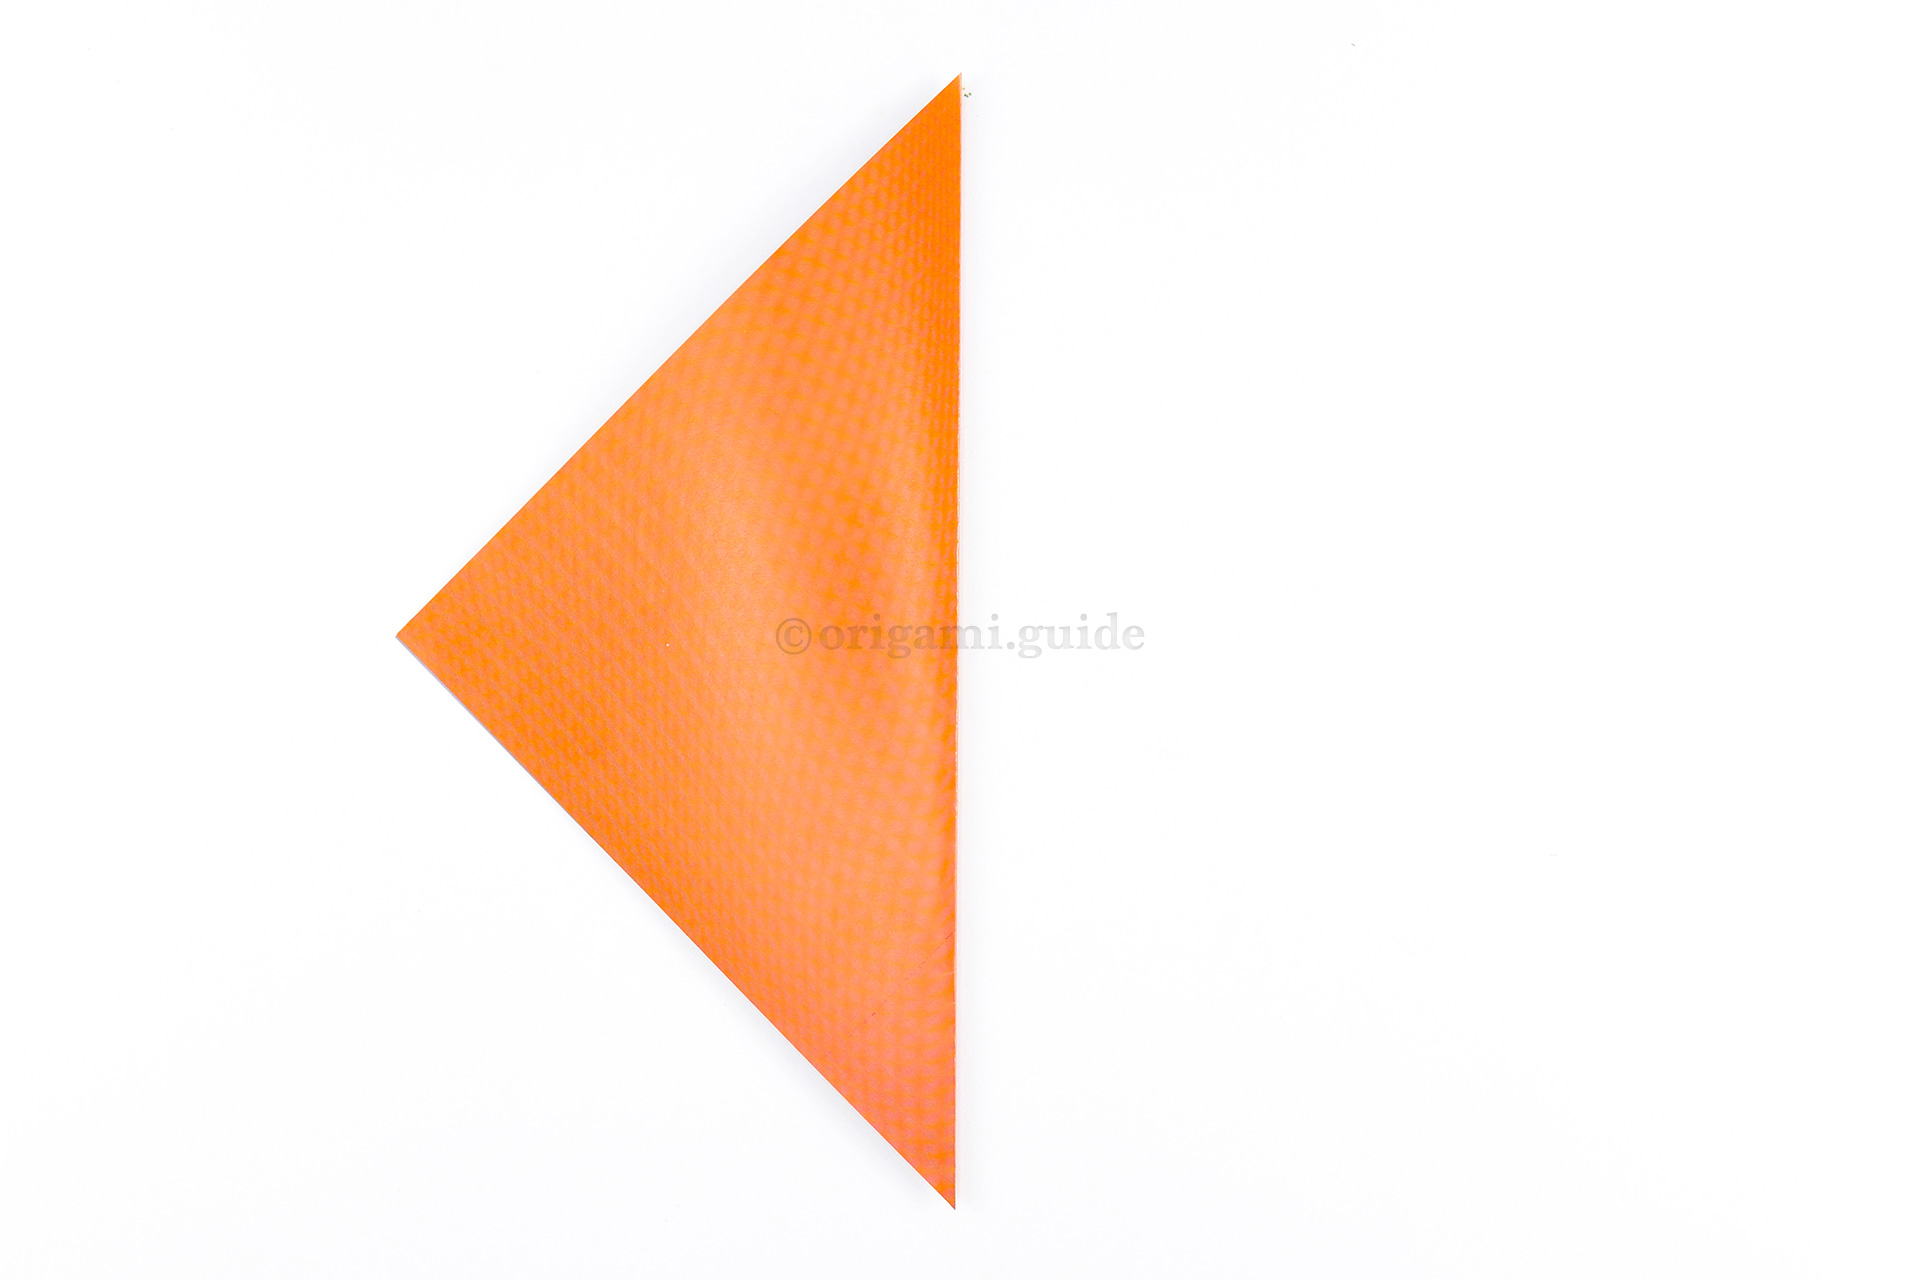 Fold the paper in half, from right to left so that you have a triangle.